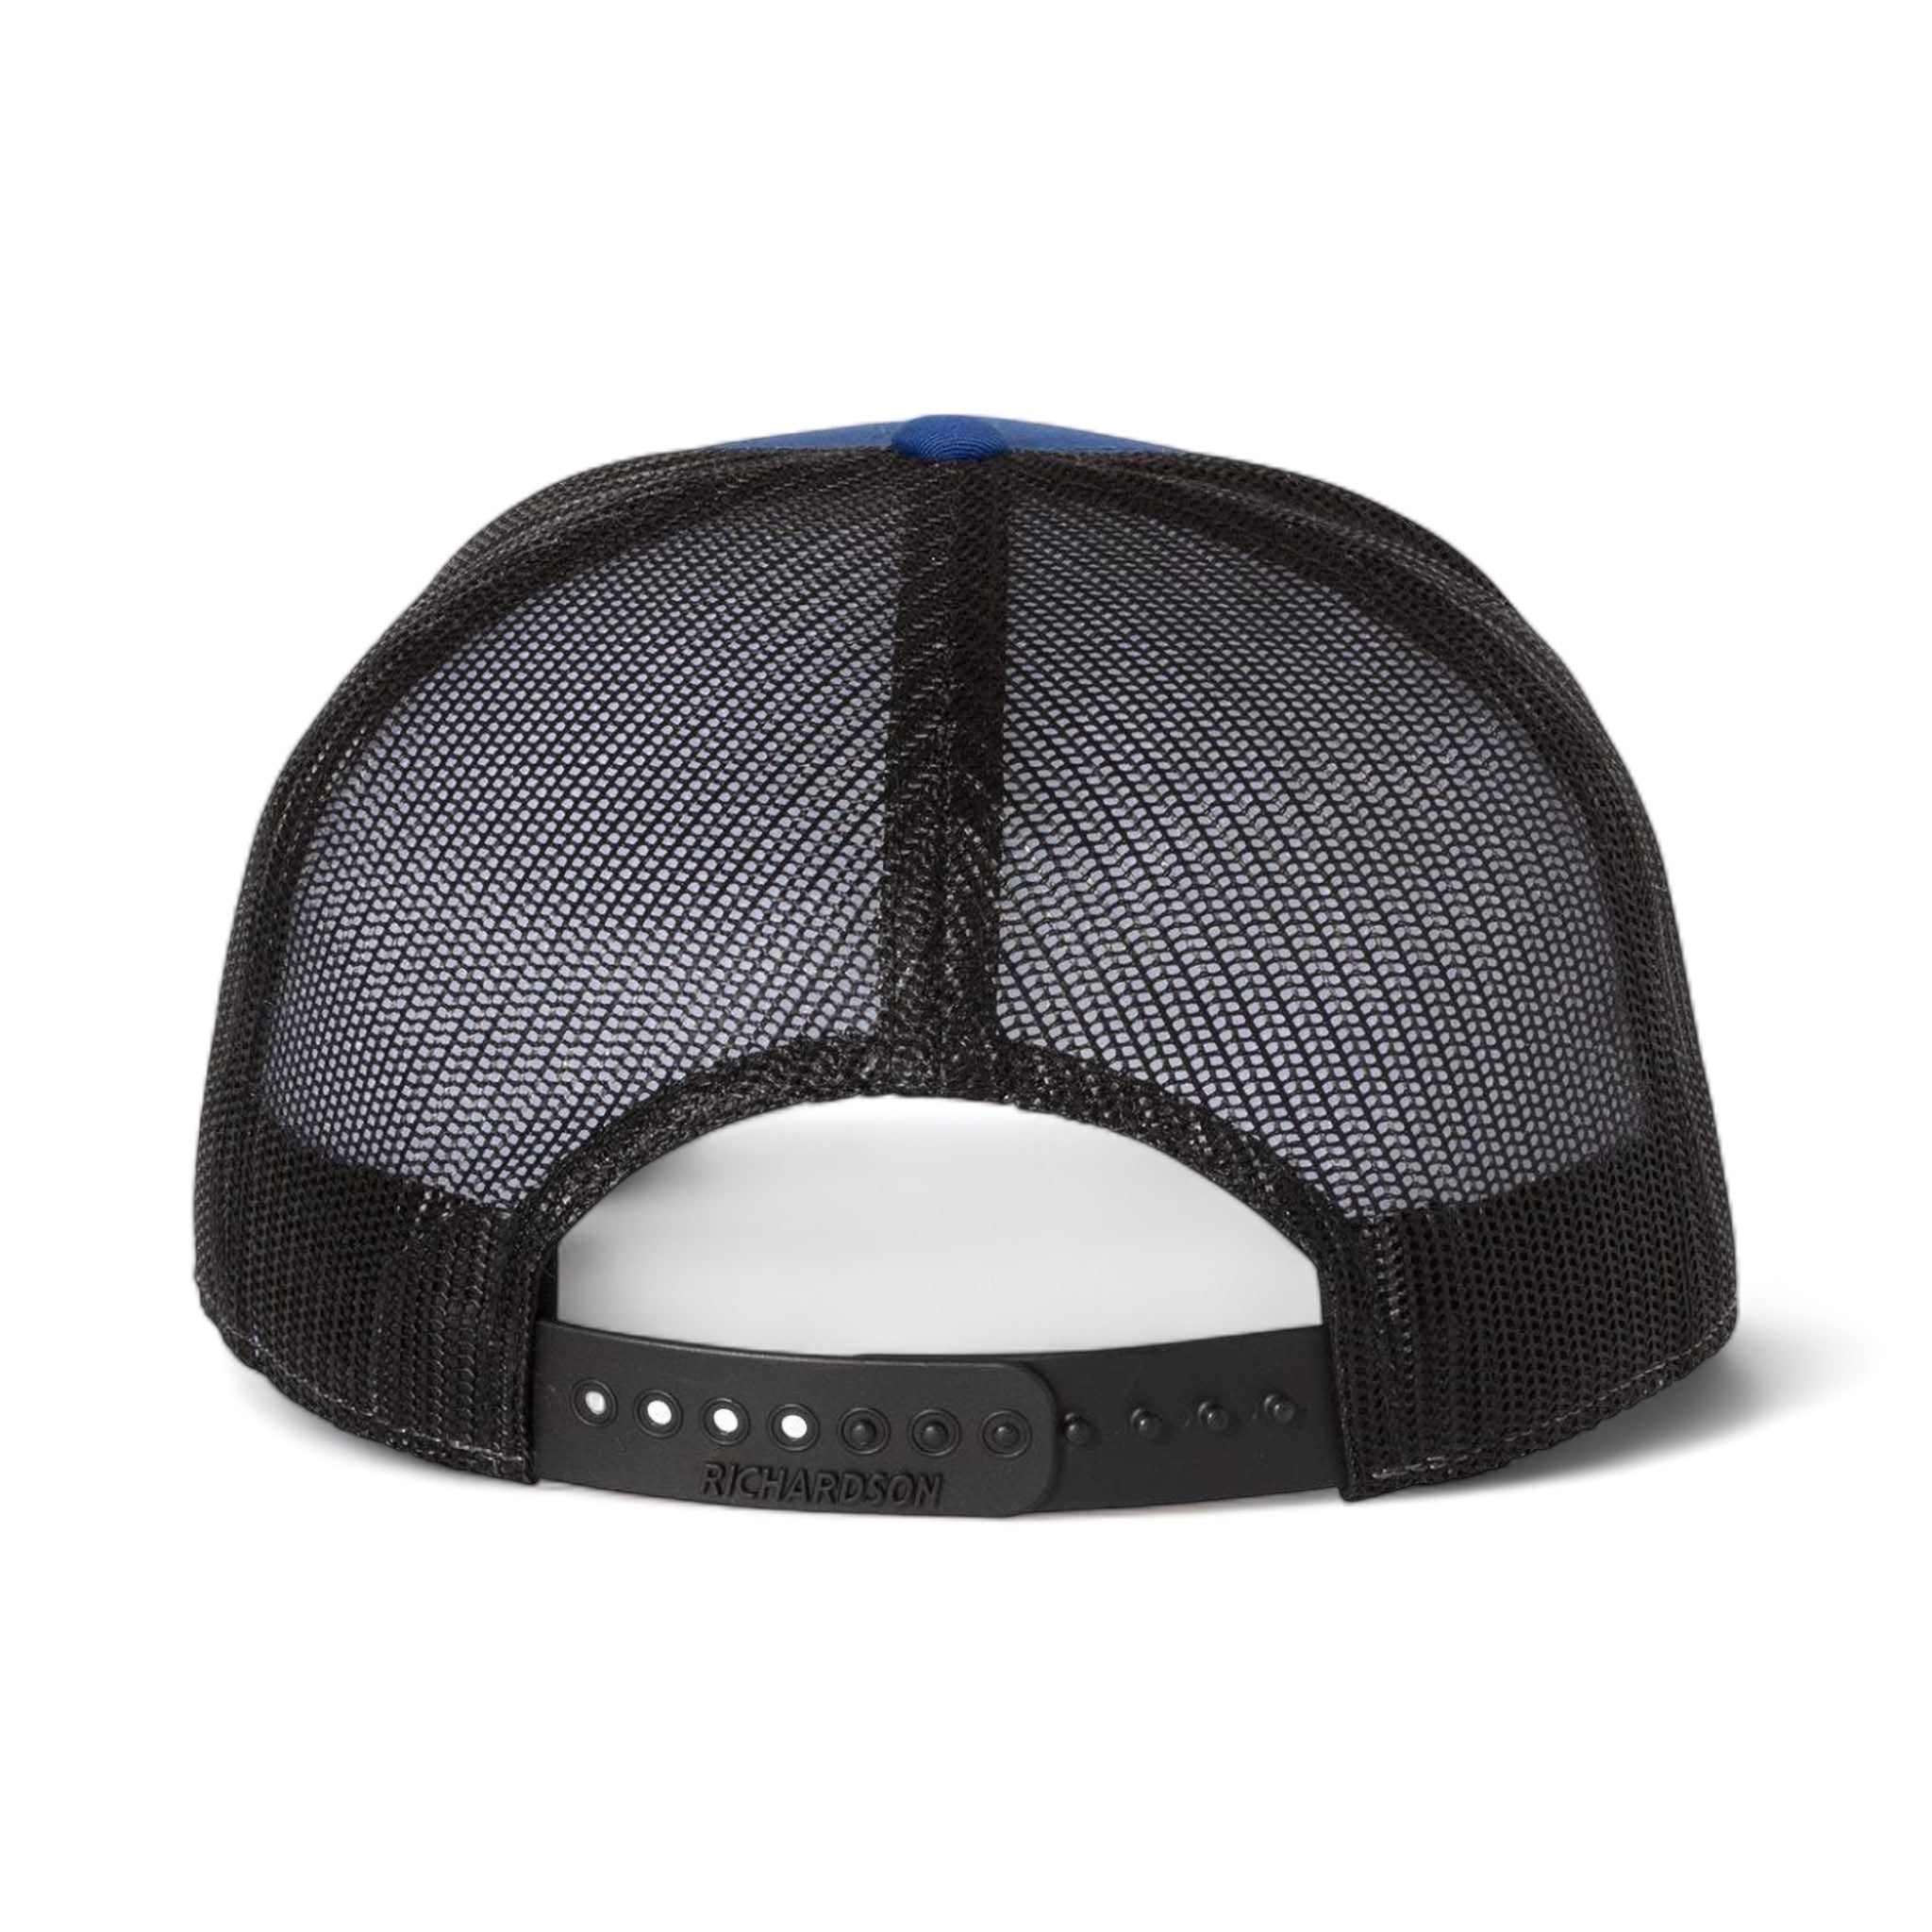 Back view of Richardson 168 custom hat in royal and black